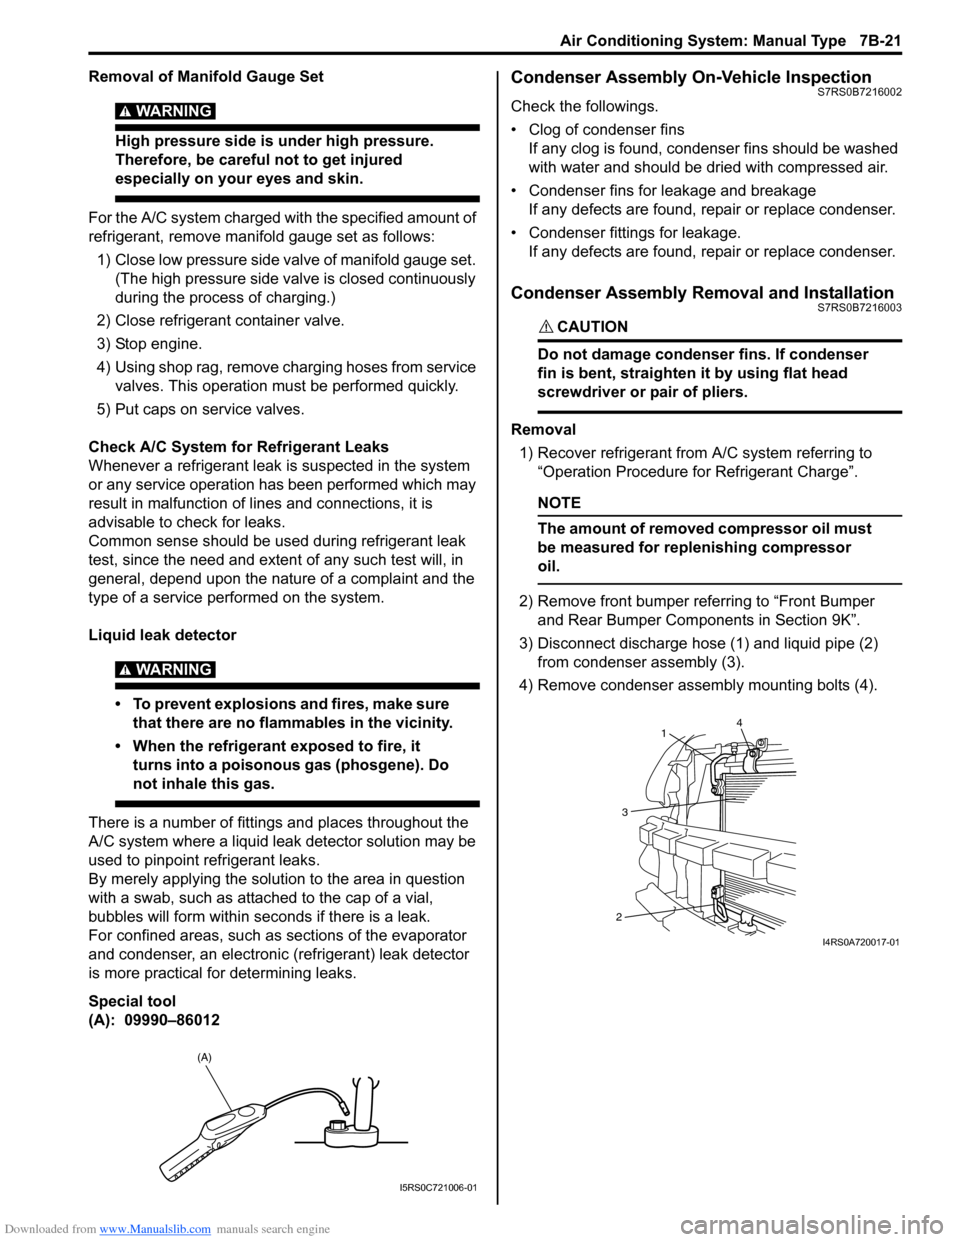 SUZUKI SWIFT 2006 2.G Service Workshop Manual Downloaded from www.Manualslib.com manuals search engine Air Conditioning System: Manual Type 7B-21
Removal of Manifold Gauge Set
WARNING! 
High pressure side is under high pressure. 
Therefore, be ca